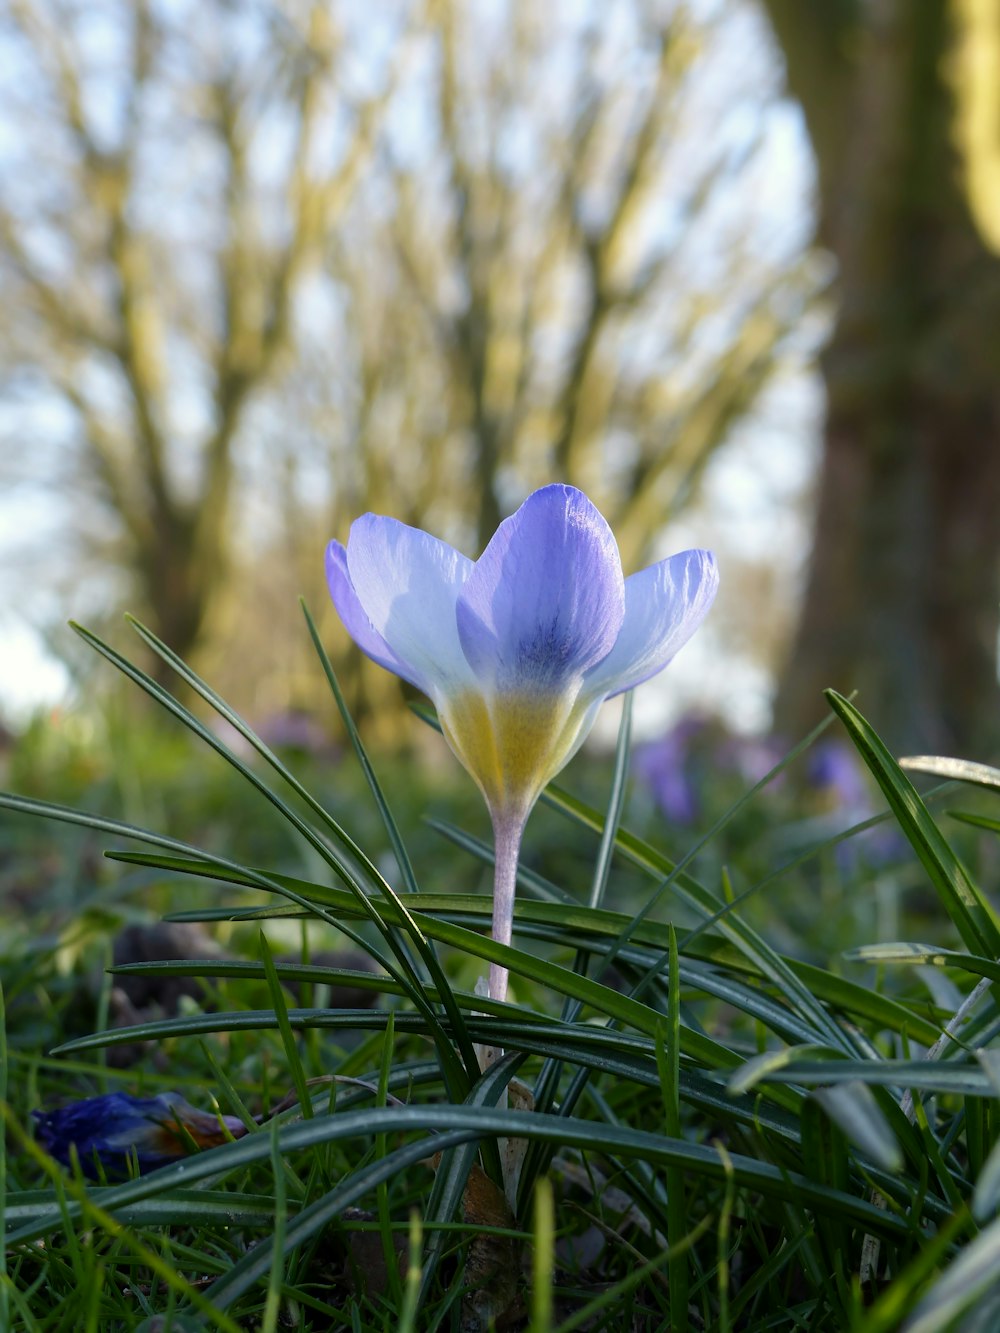 a single blue flower sitting in the grass